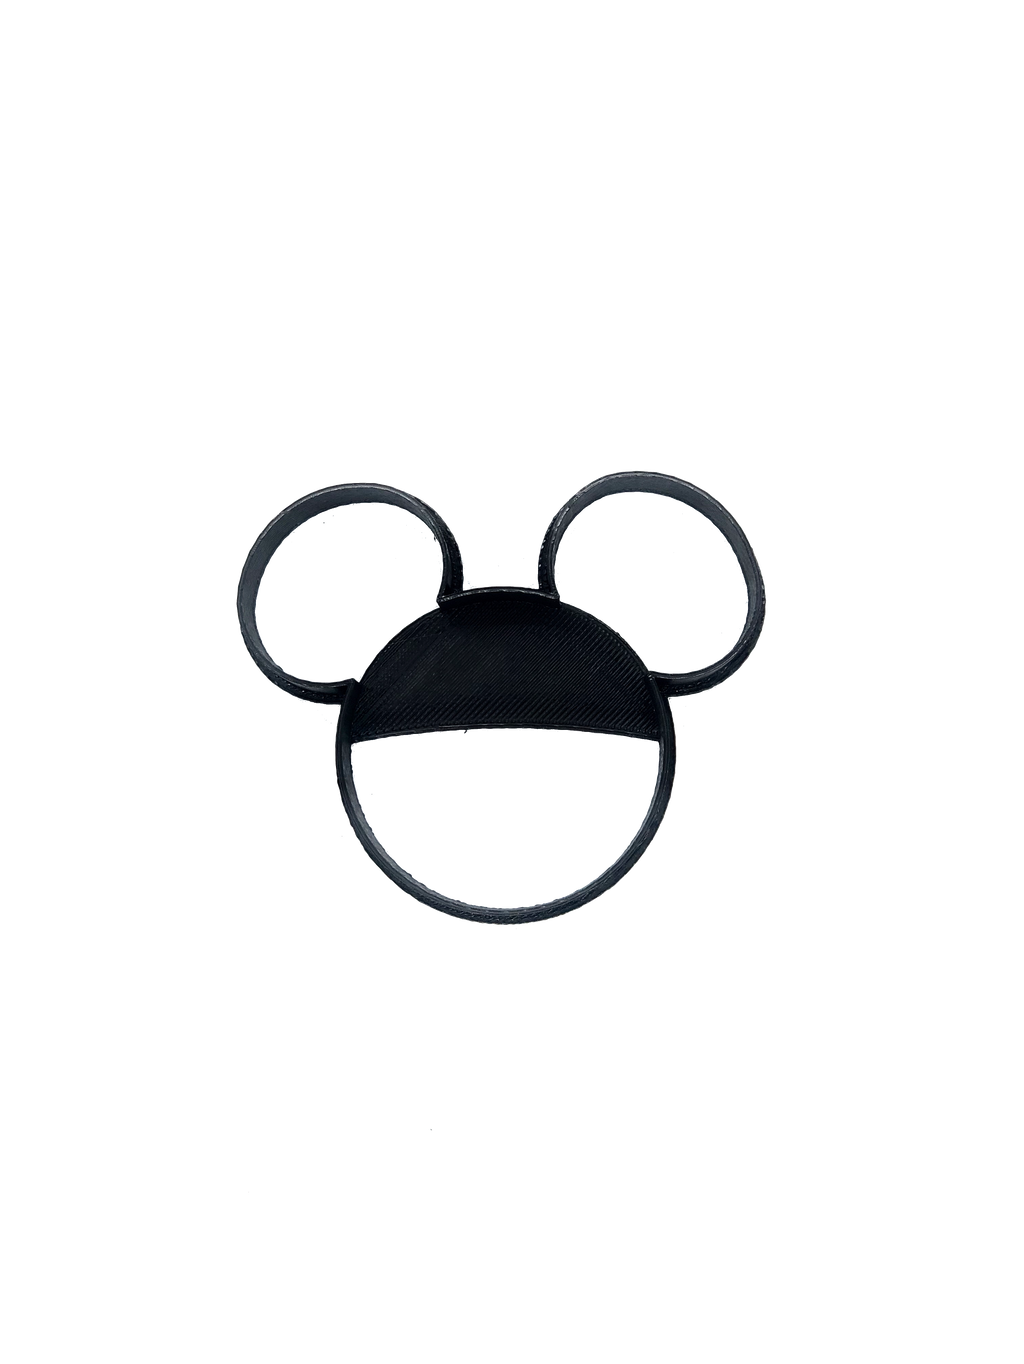 Mr. Mouse Cookie Cutter